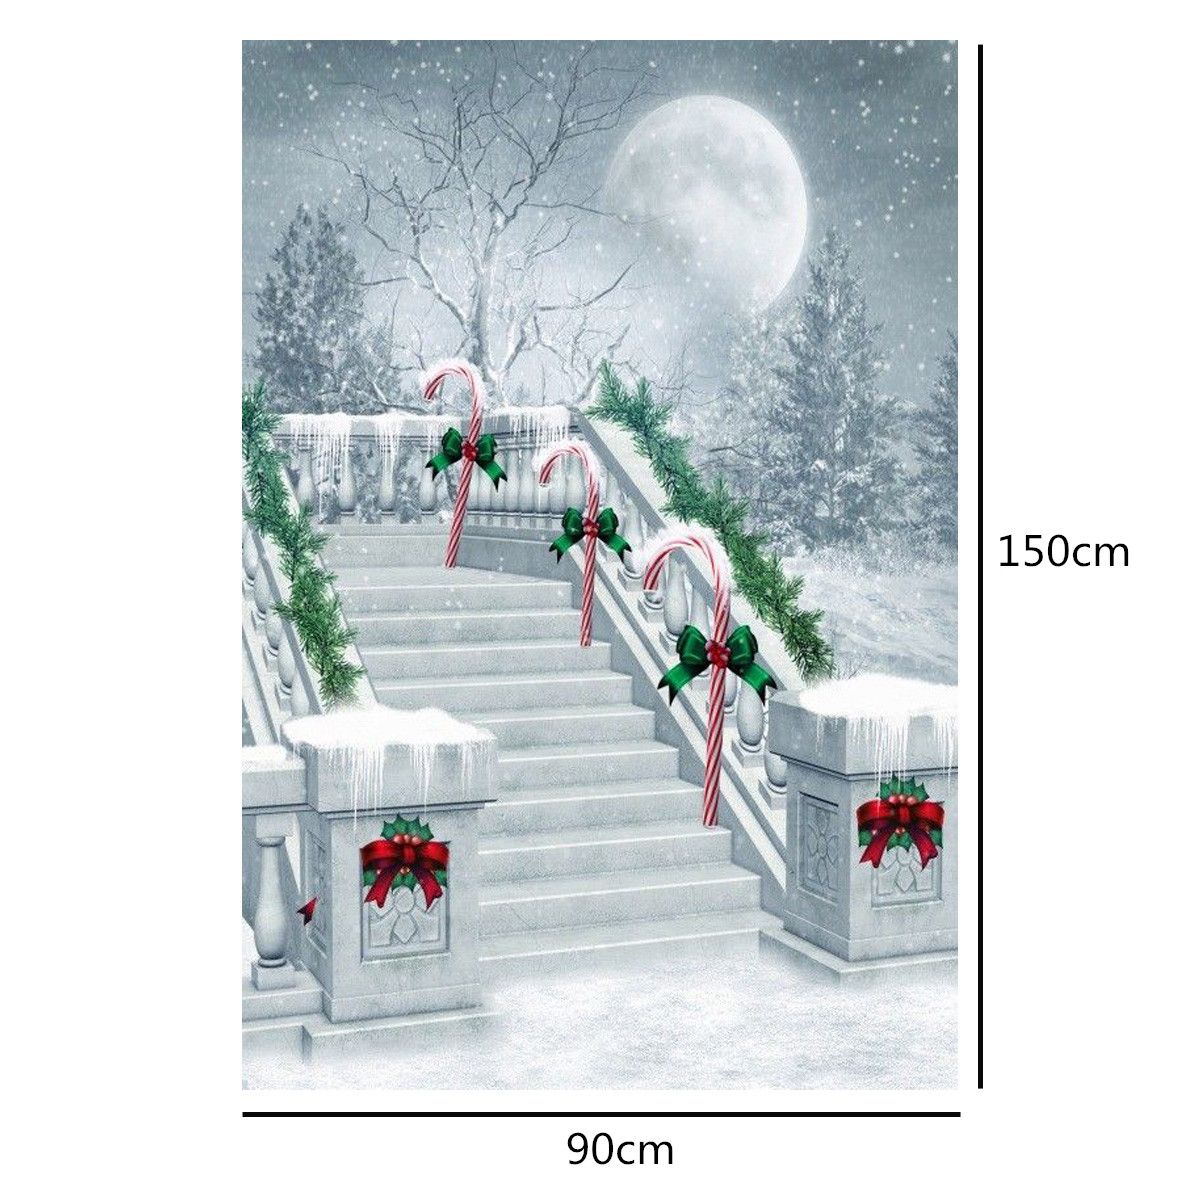 3x5FT-Christmas-Snowy-Street-Ladder-Photography-Backdrop-Studio-Prop-Background-1394510